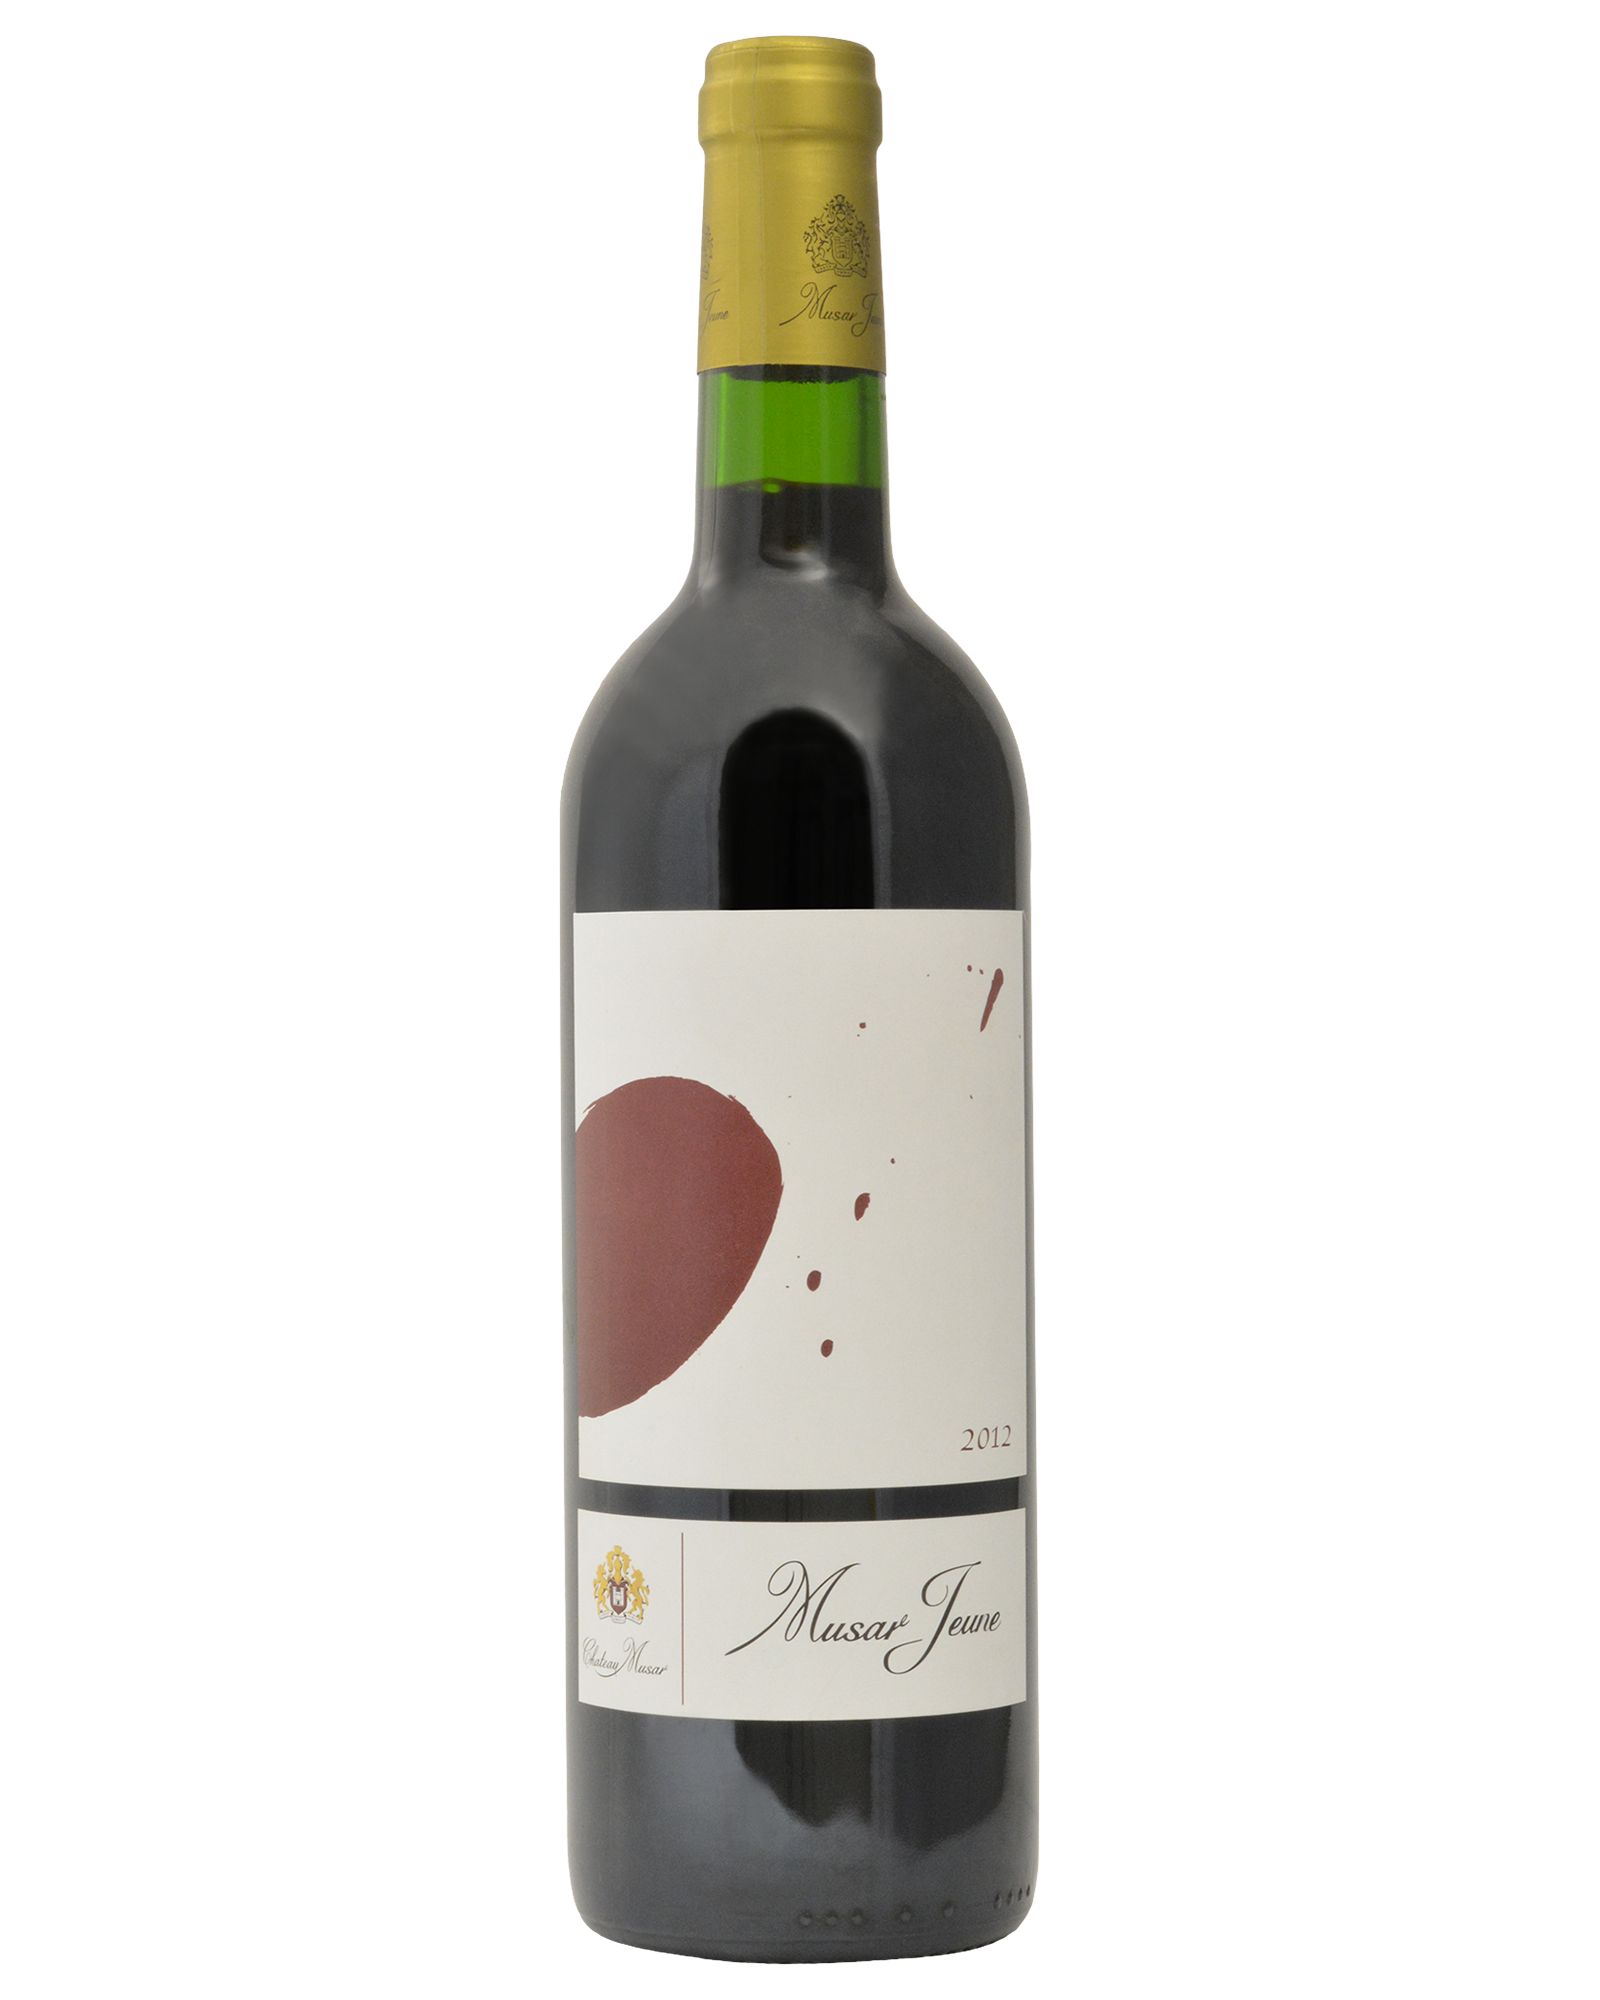 Chateau Musar Musar Jeune’ Red